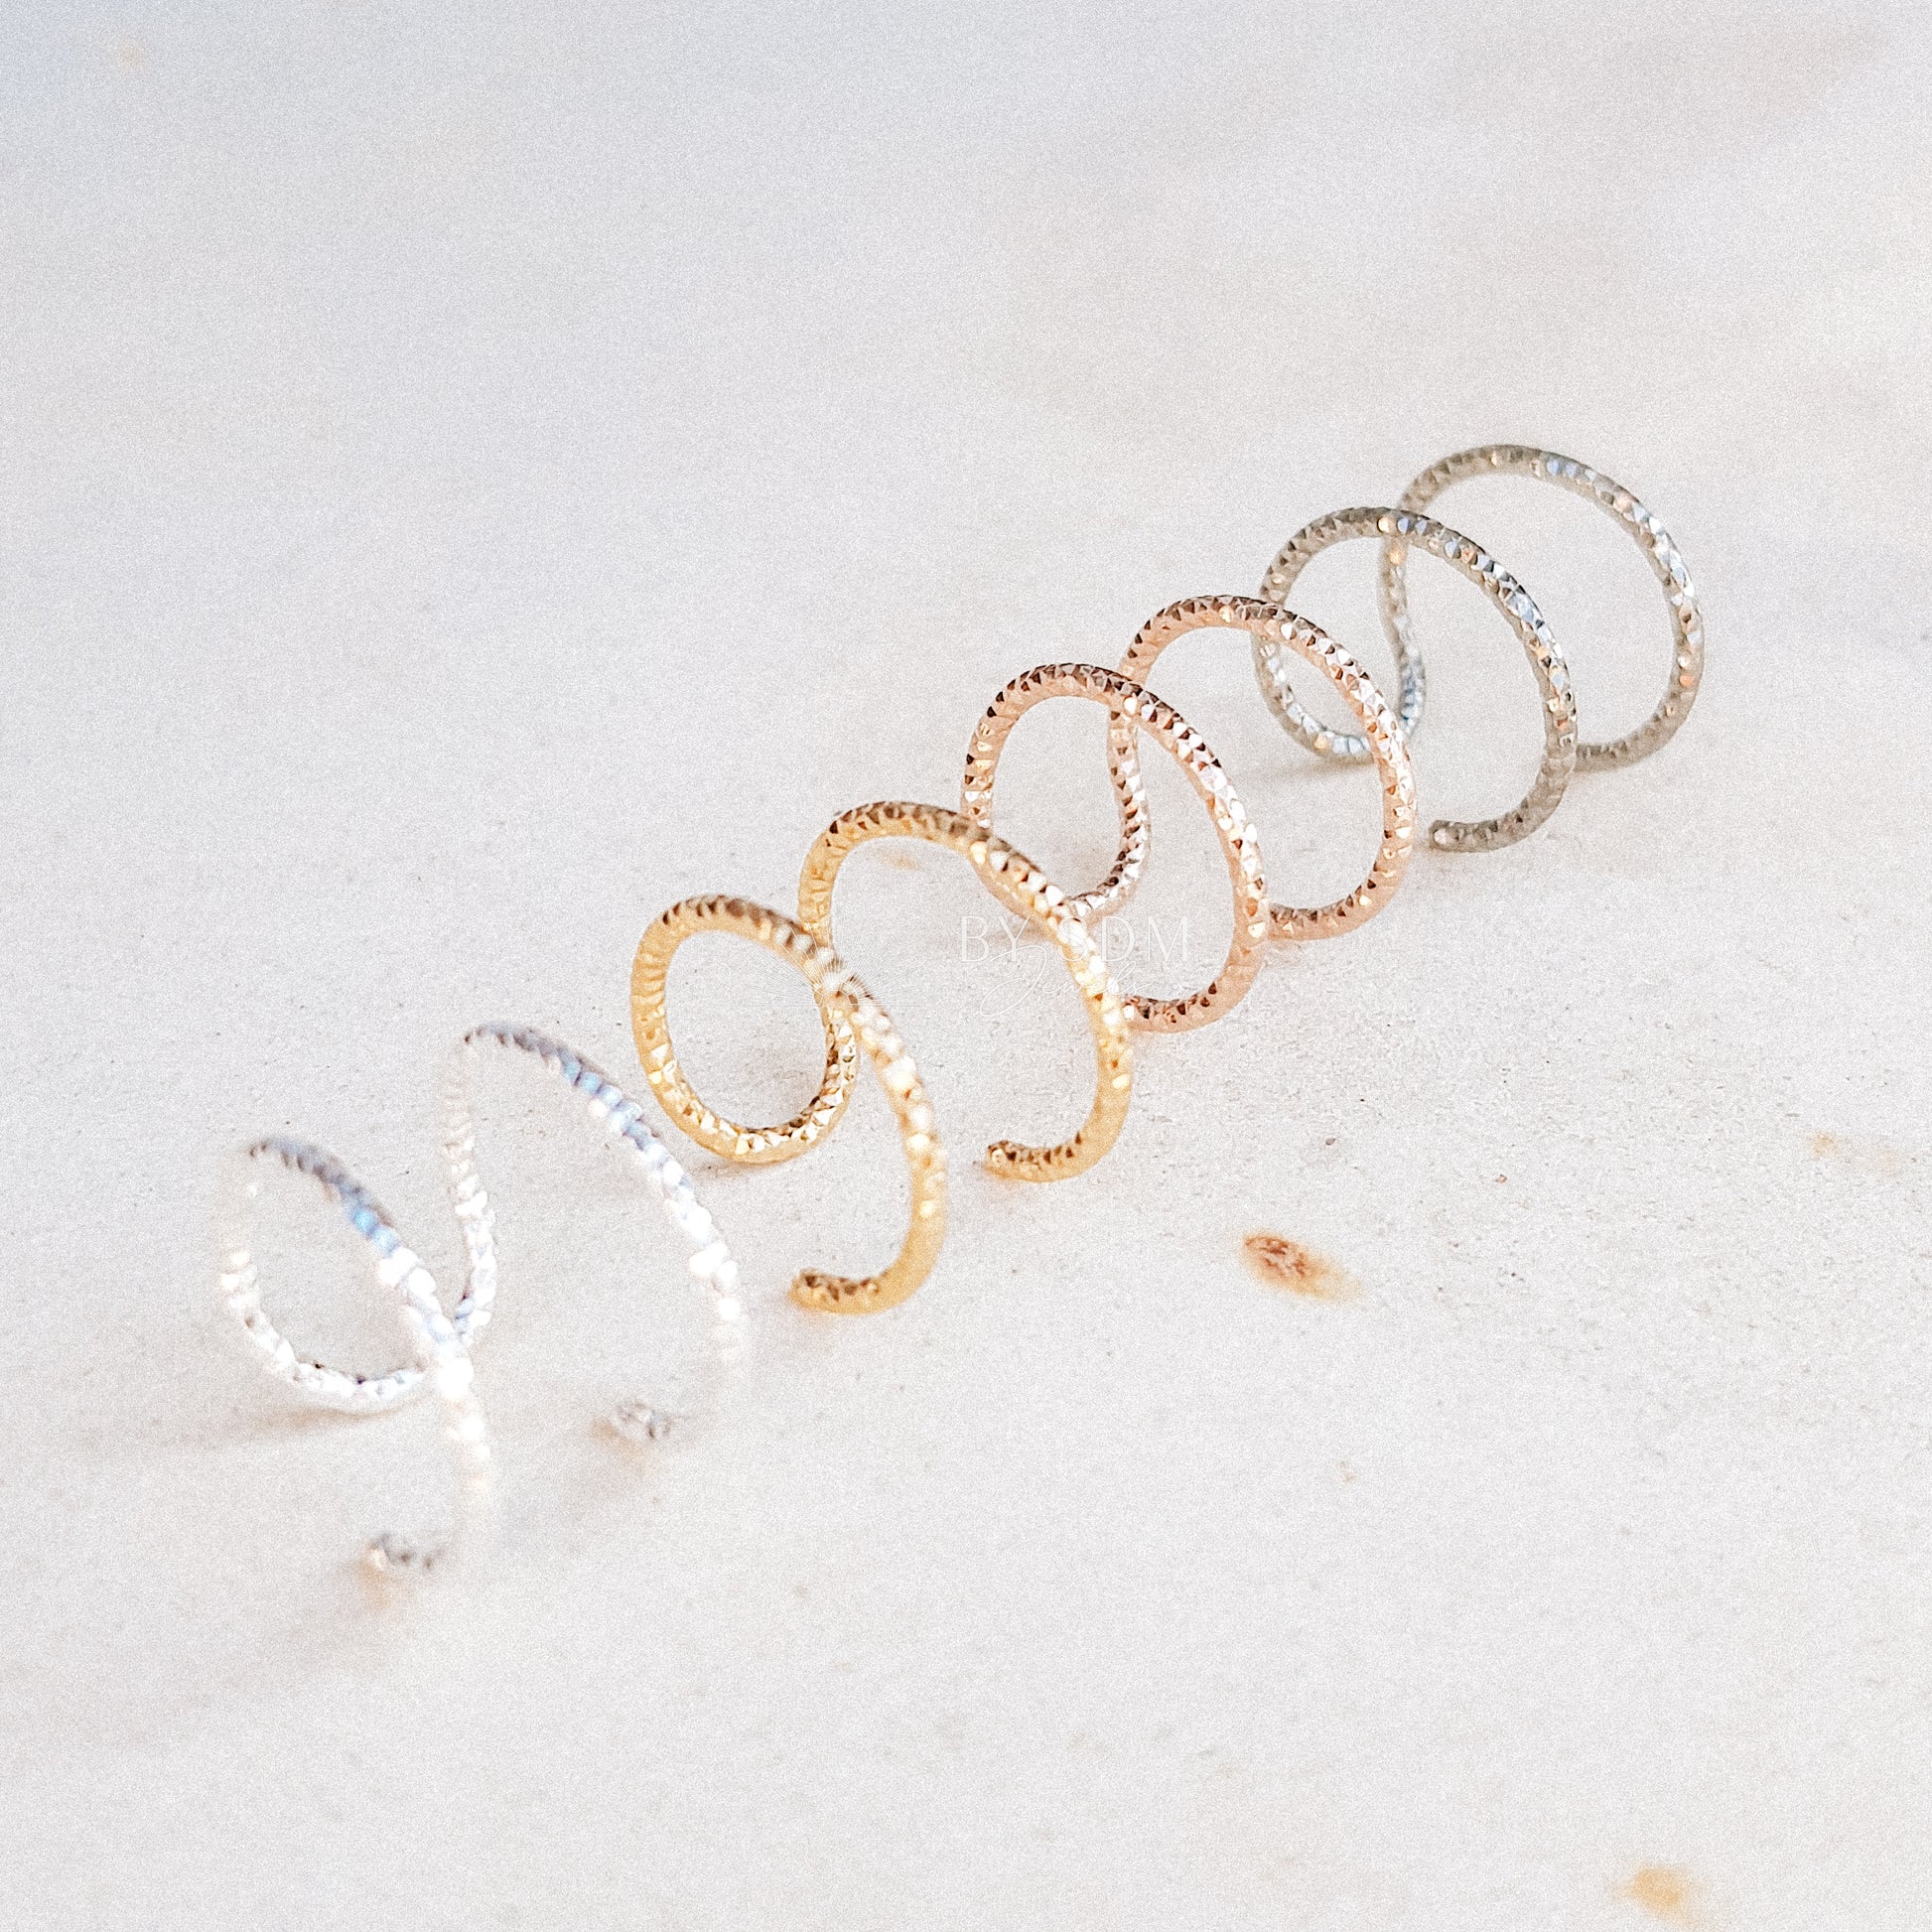 Double Wire Ear Cuff • Dainty Jewelry • Sterling Silver or 18k Gold • Modern • Minimal • Gifts for Her • Cartilage Earring • BYSDMJEWELS